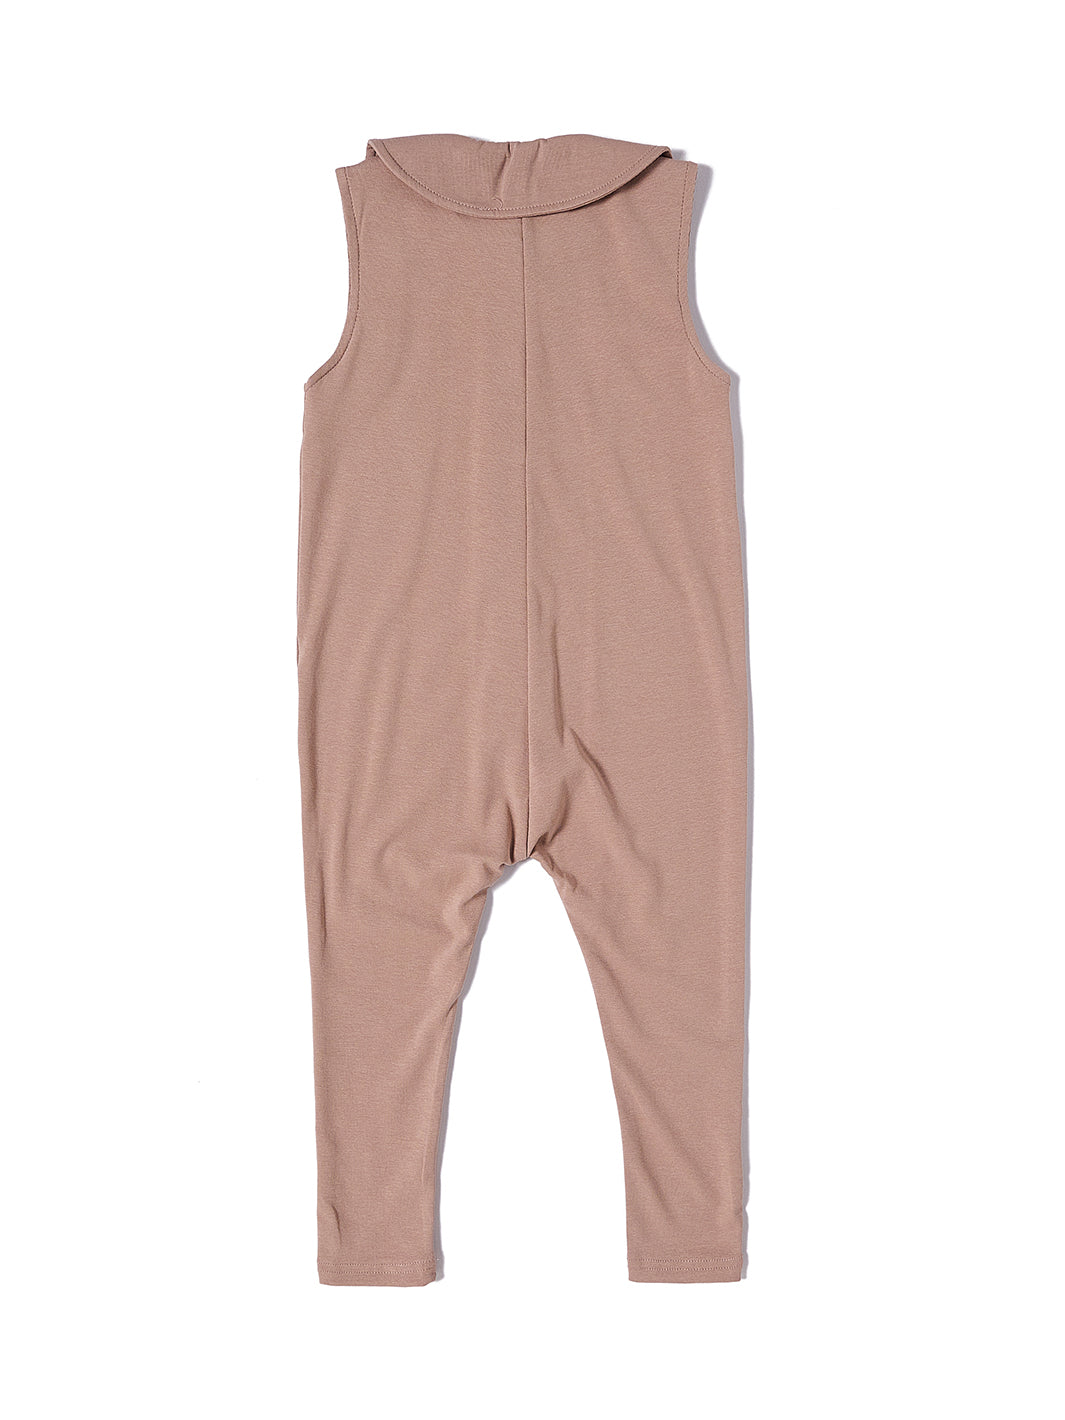 Baby Buttons Overall - Taupe